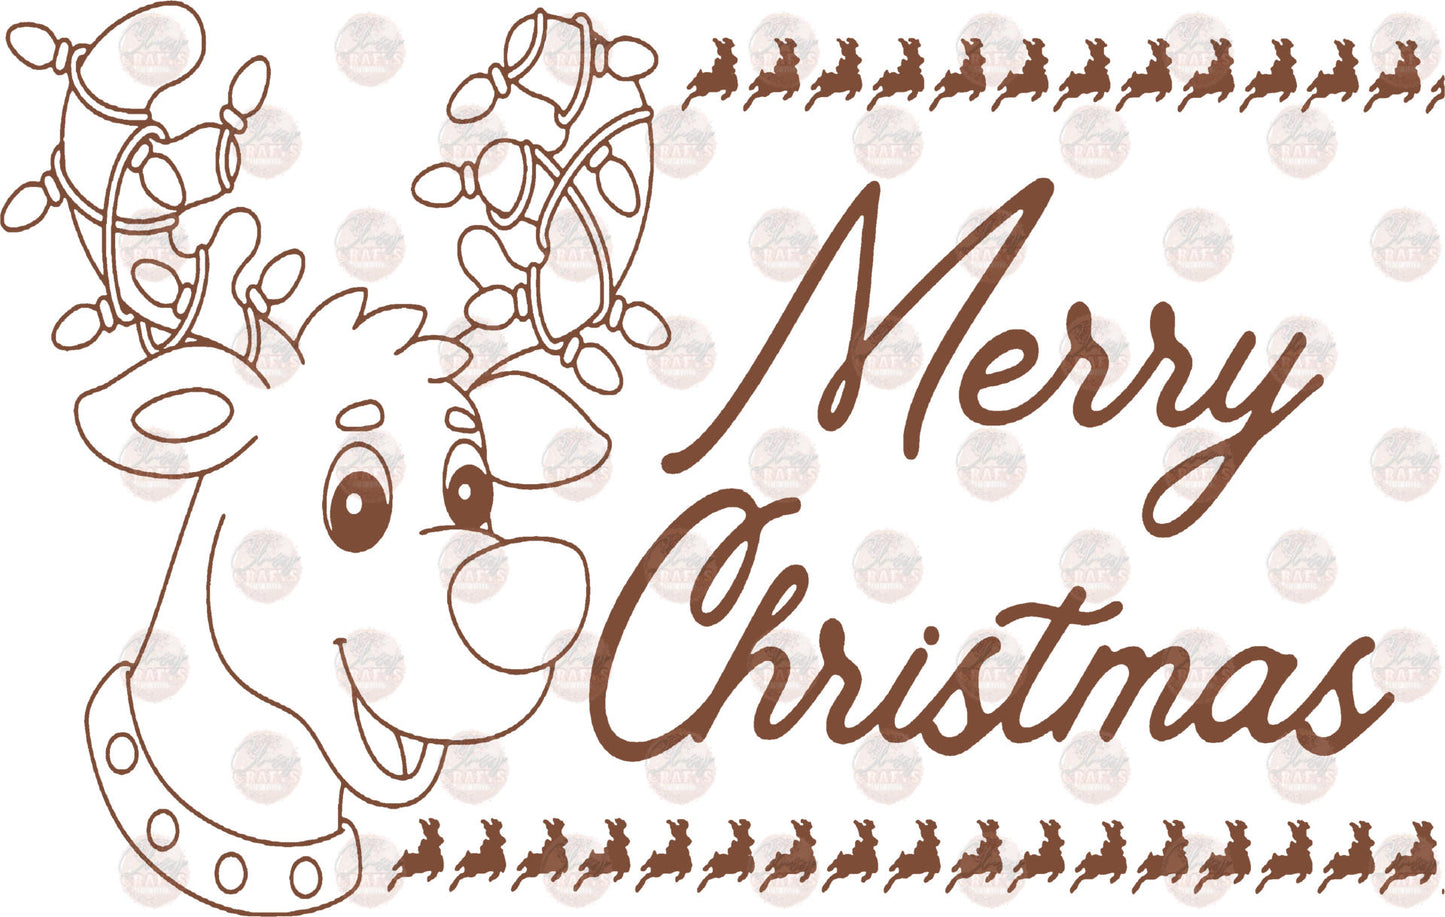 Merry Christmas Reindeer - Sublimation Transfers